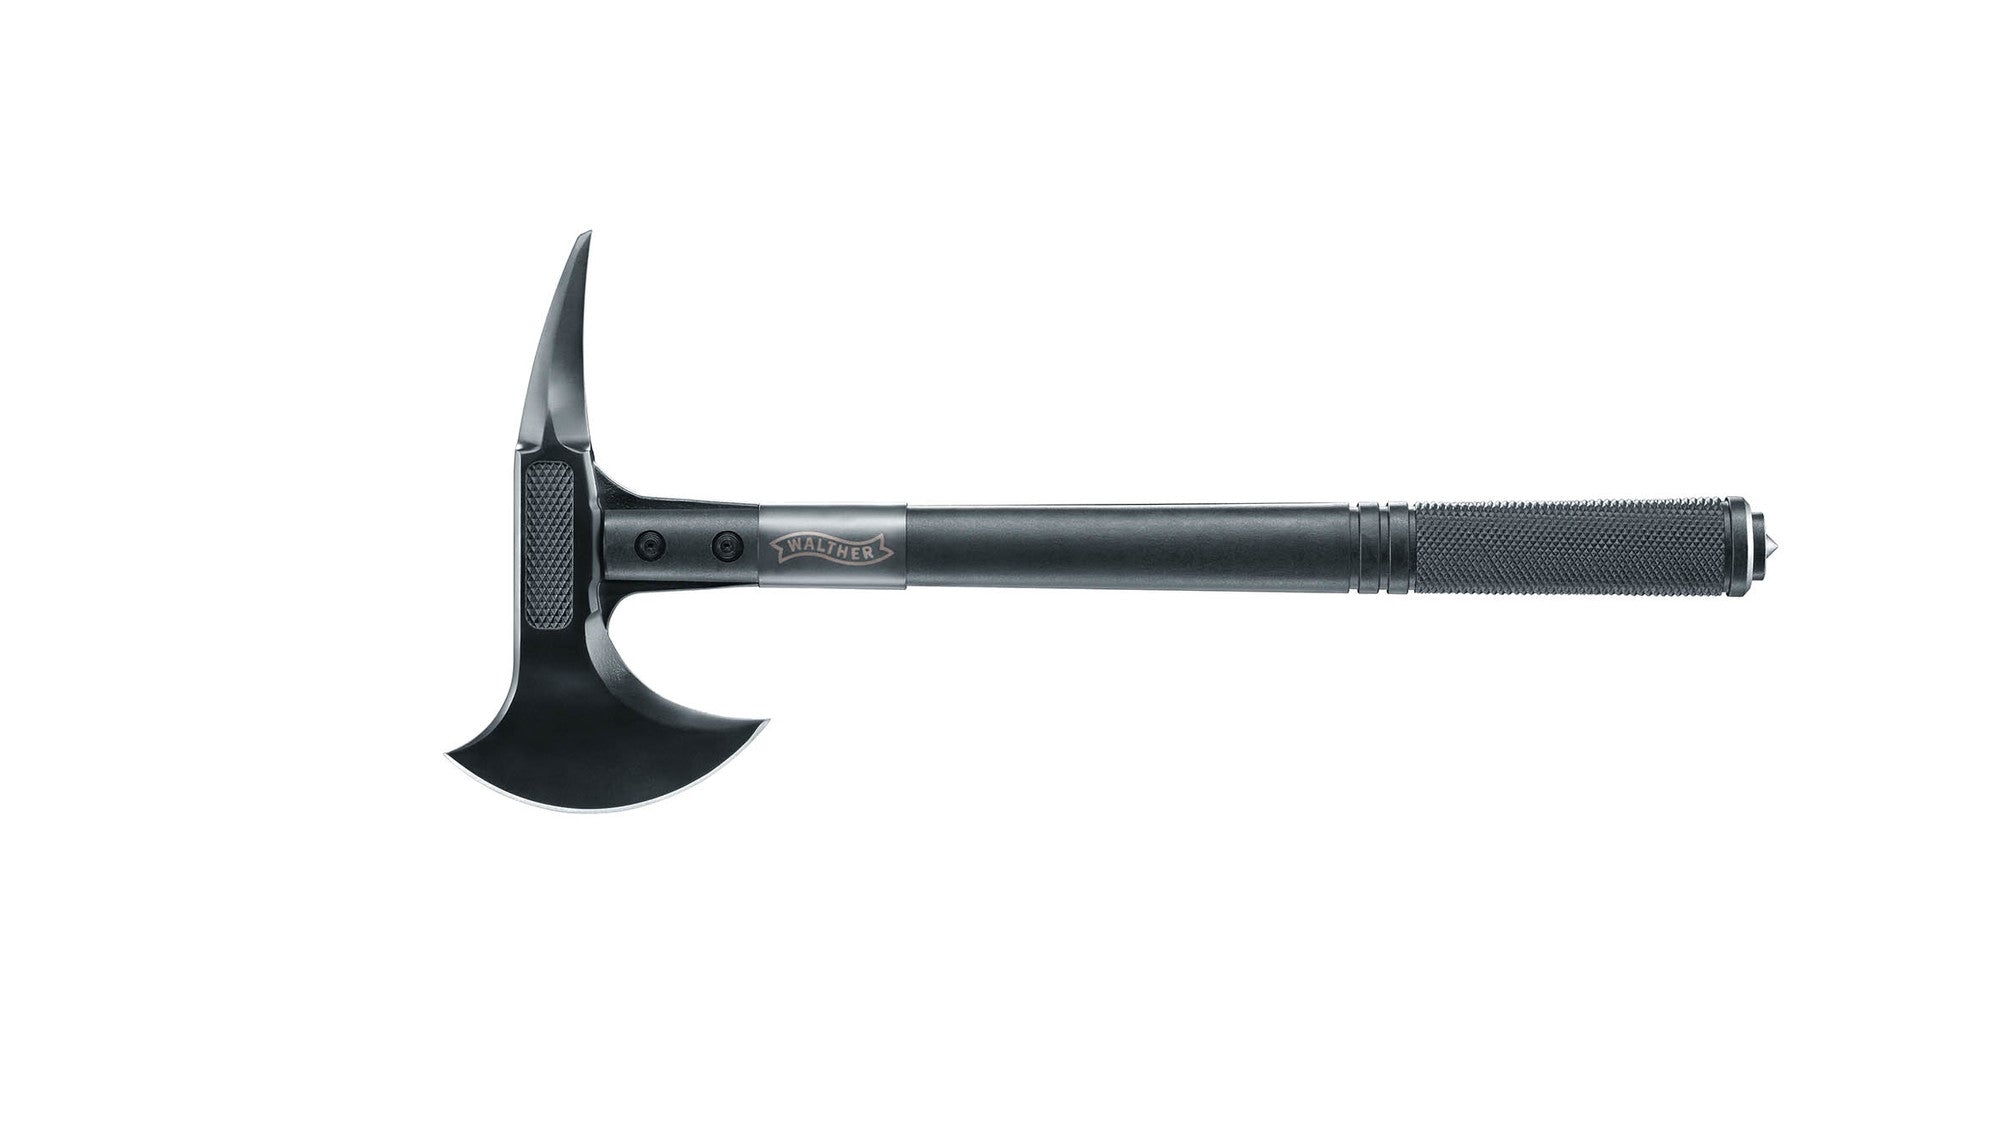 TACTICAL TOMAHAWK 420C STAINLESS